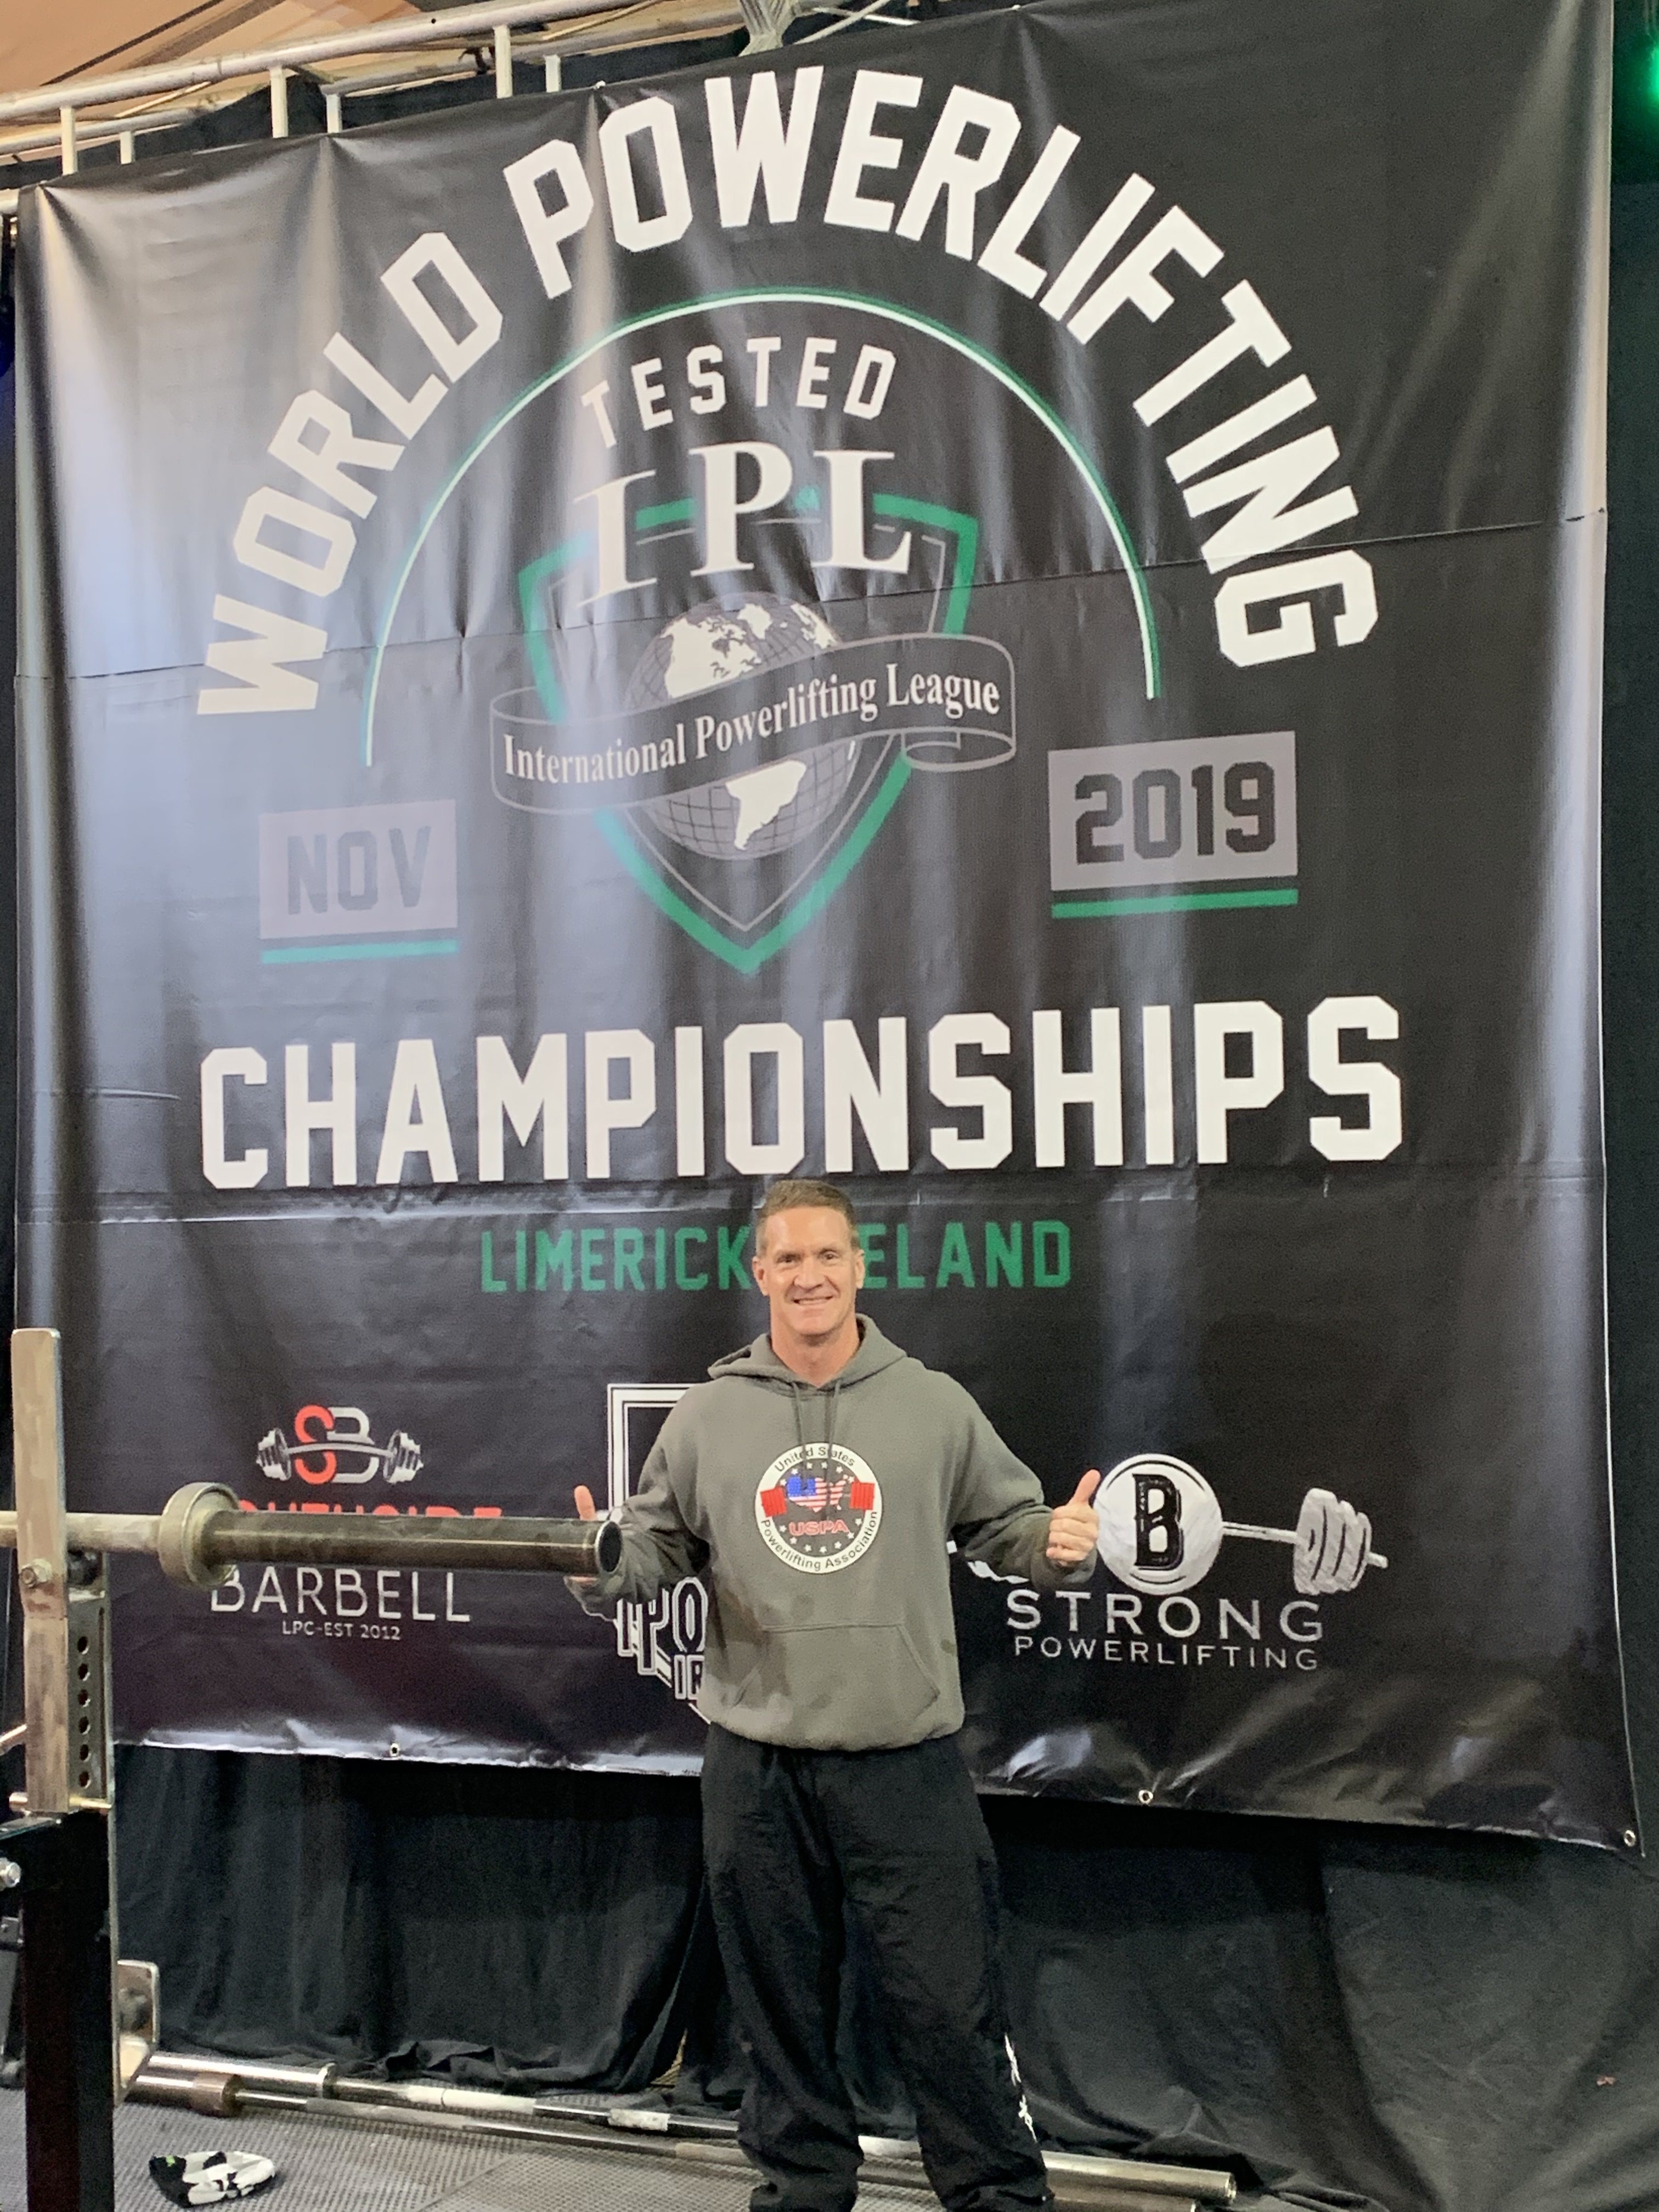 Dr. Matthew Chapman at the International Powerlifting League Drug Tested World Powerlifting Championships.